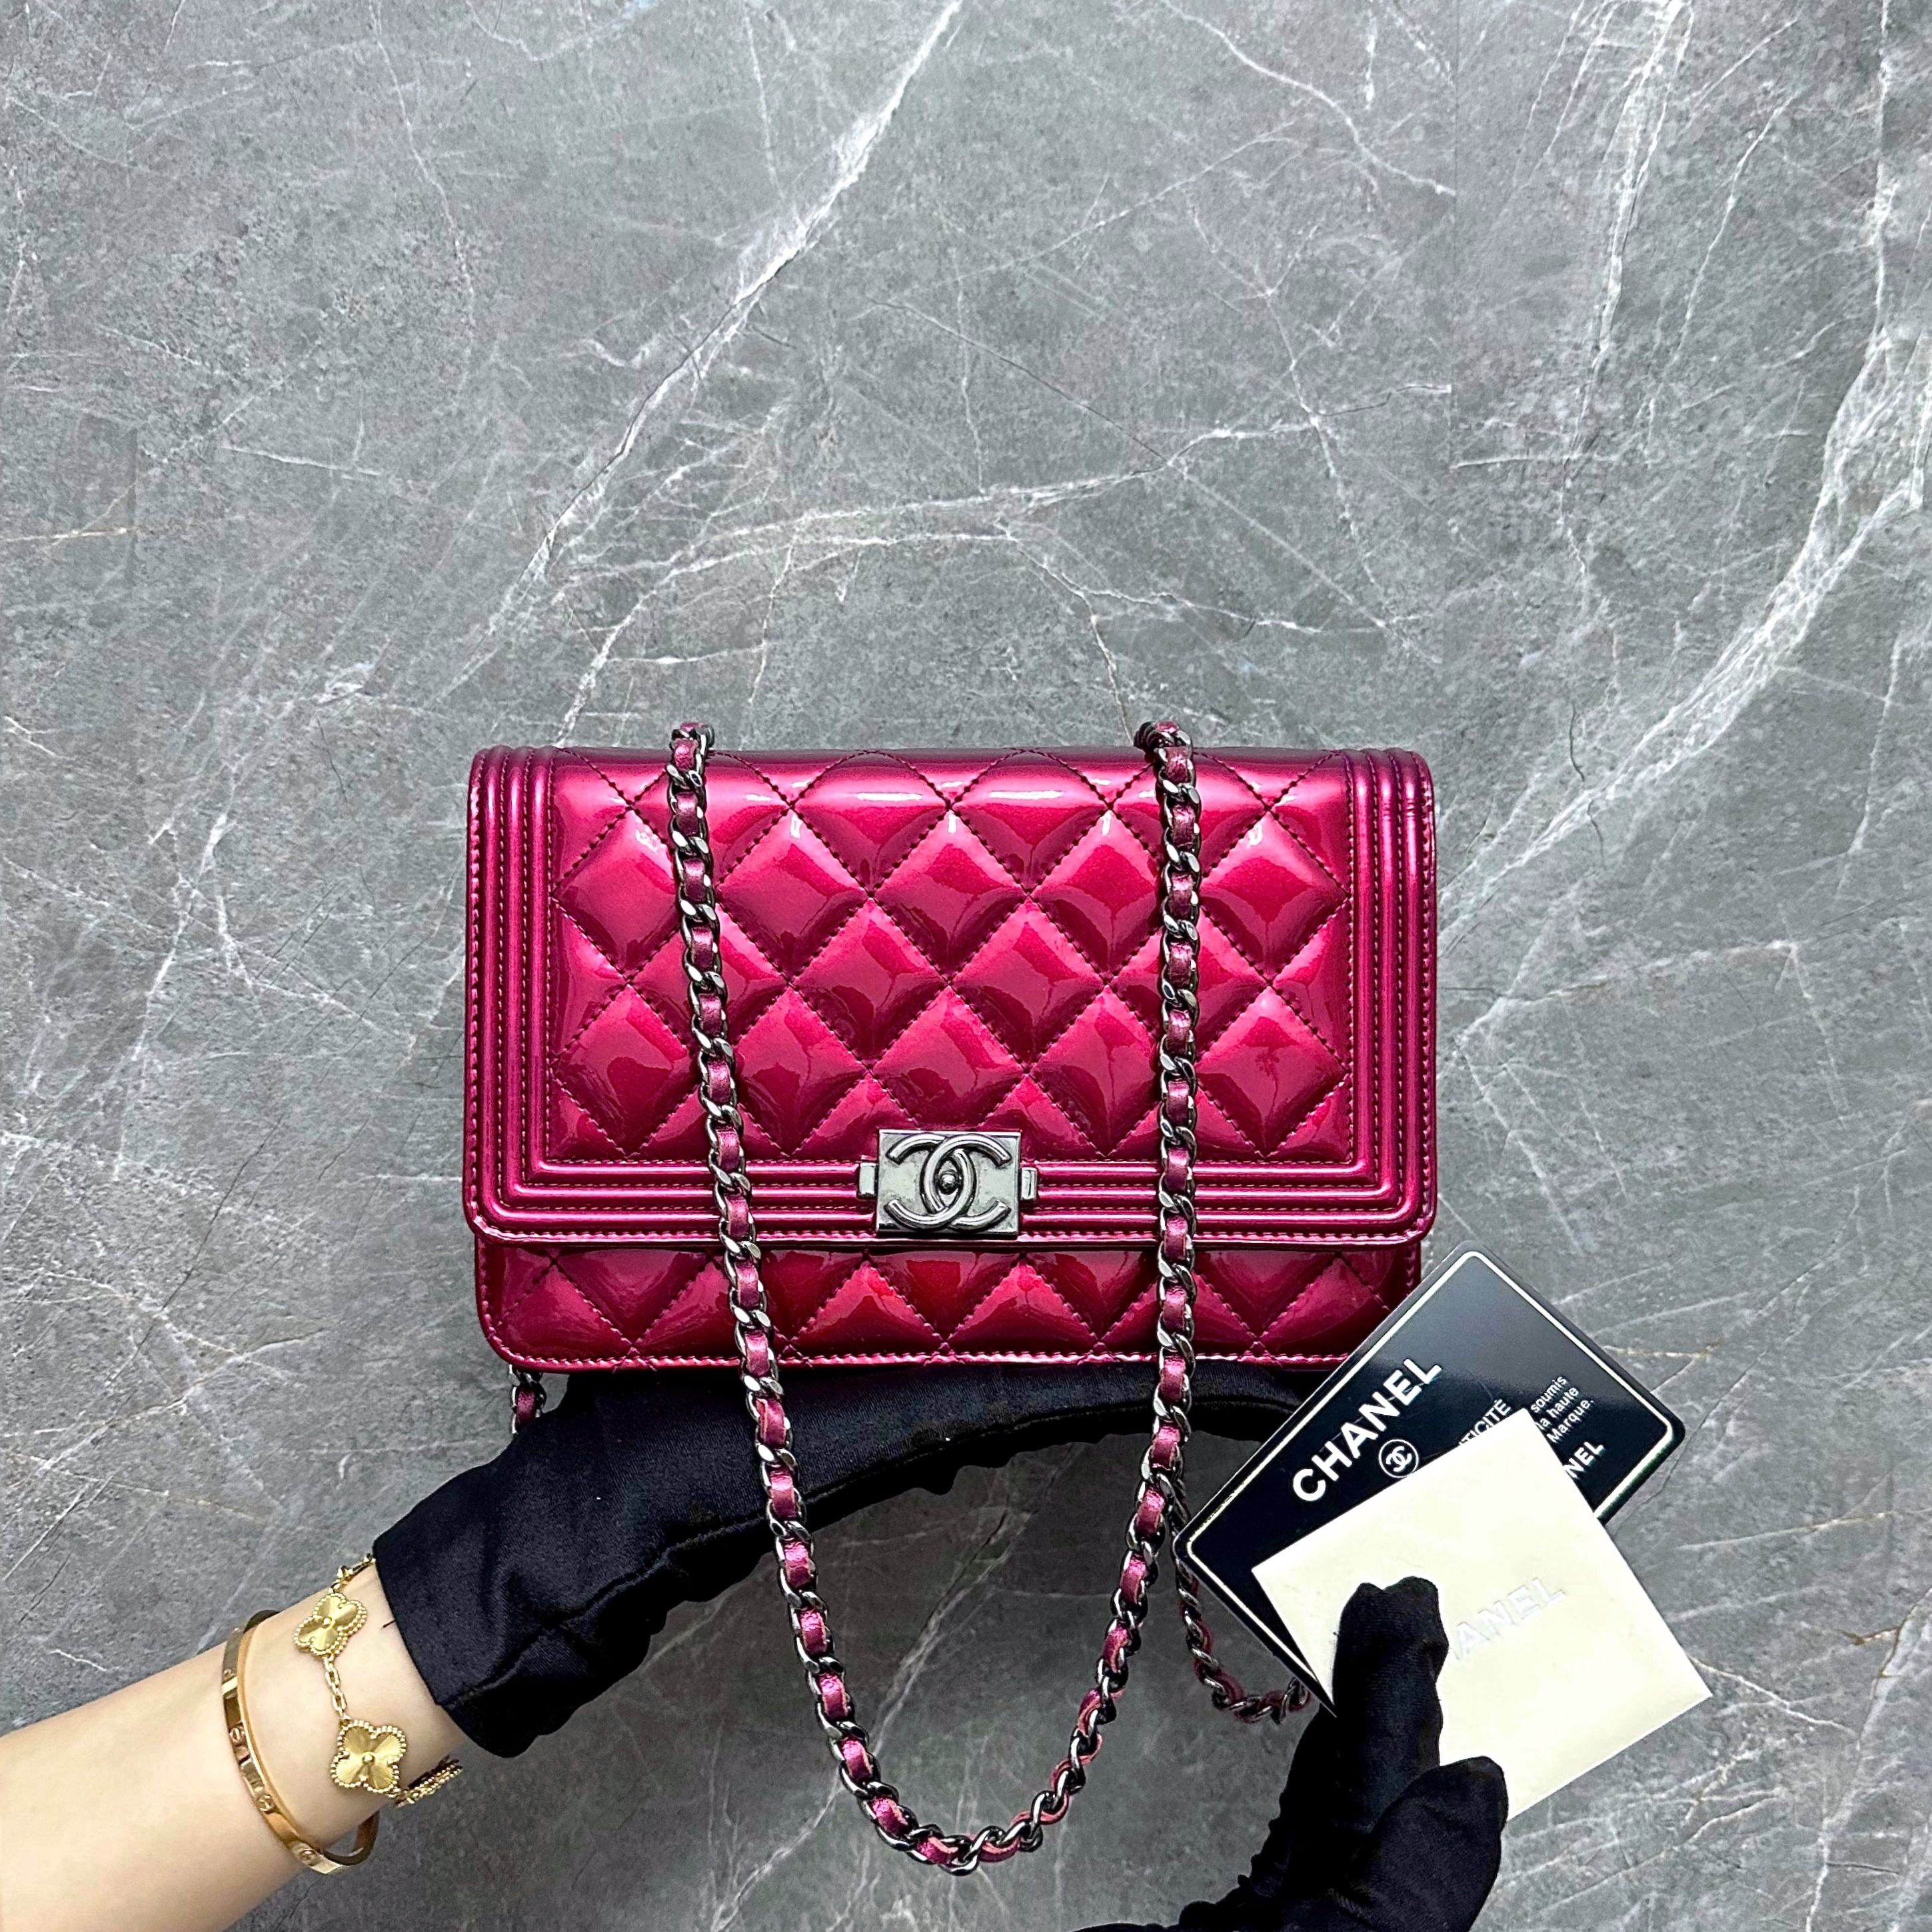 Chanel Pink Leather WOC Wallet on a Chain- Silver Hardware